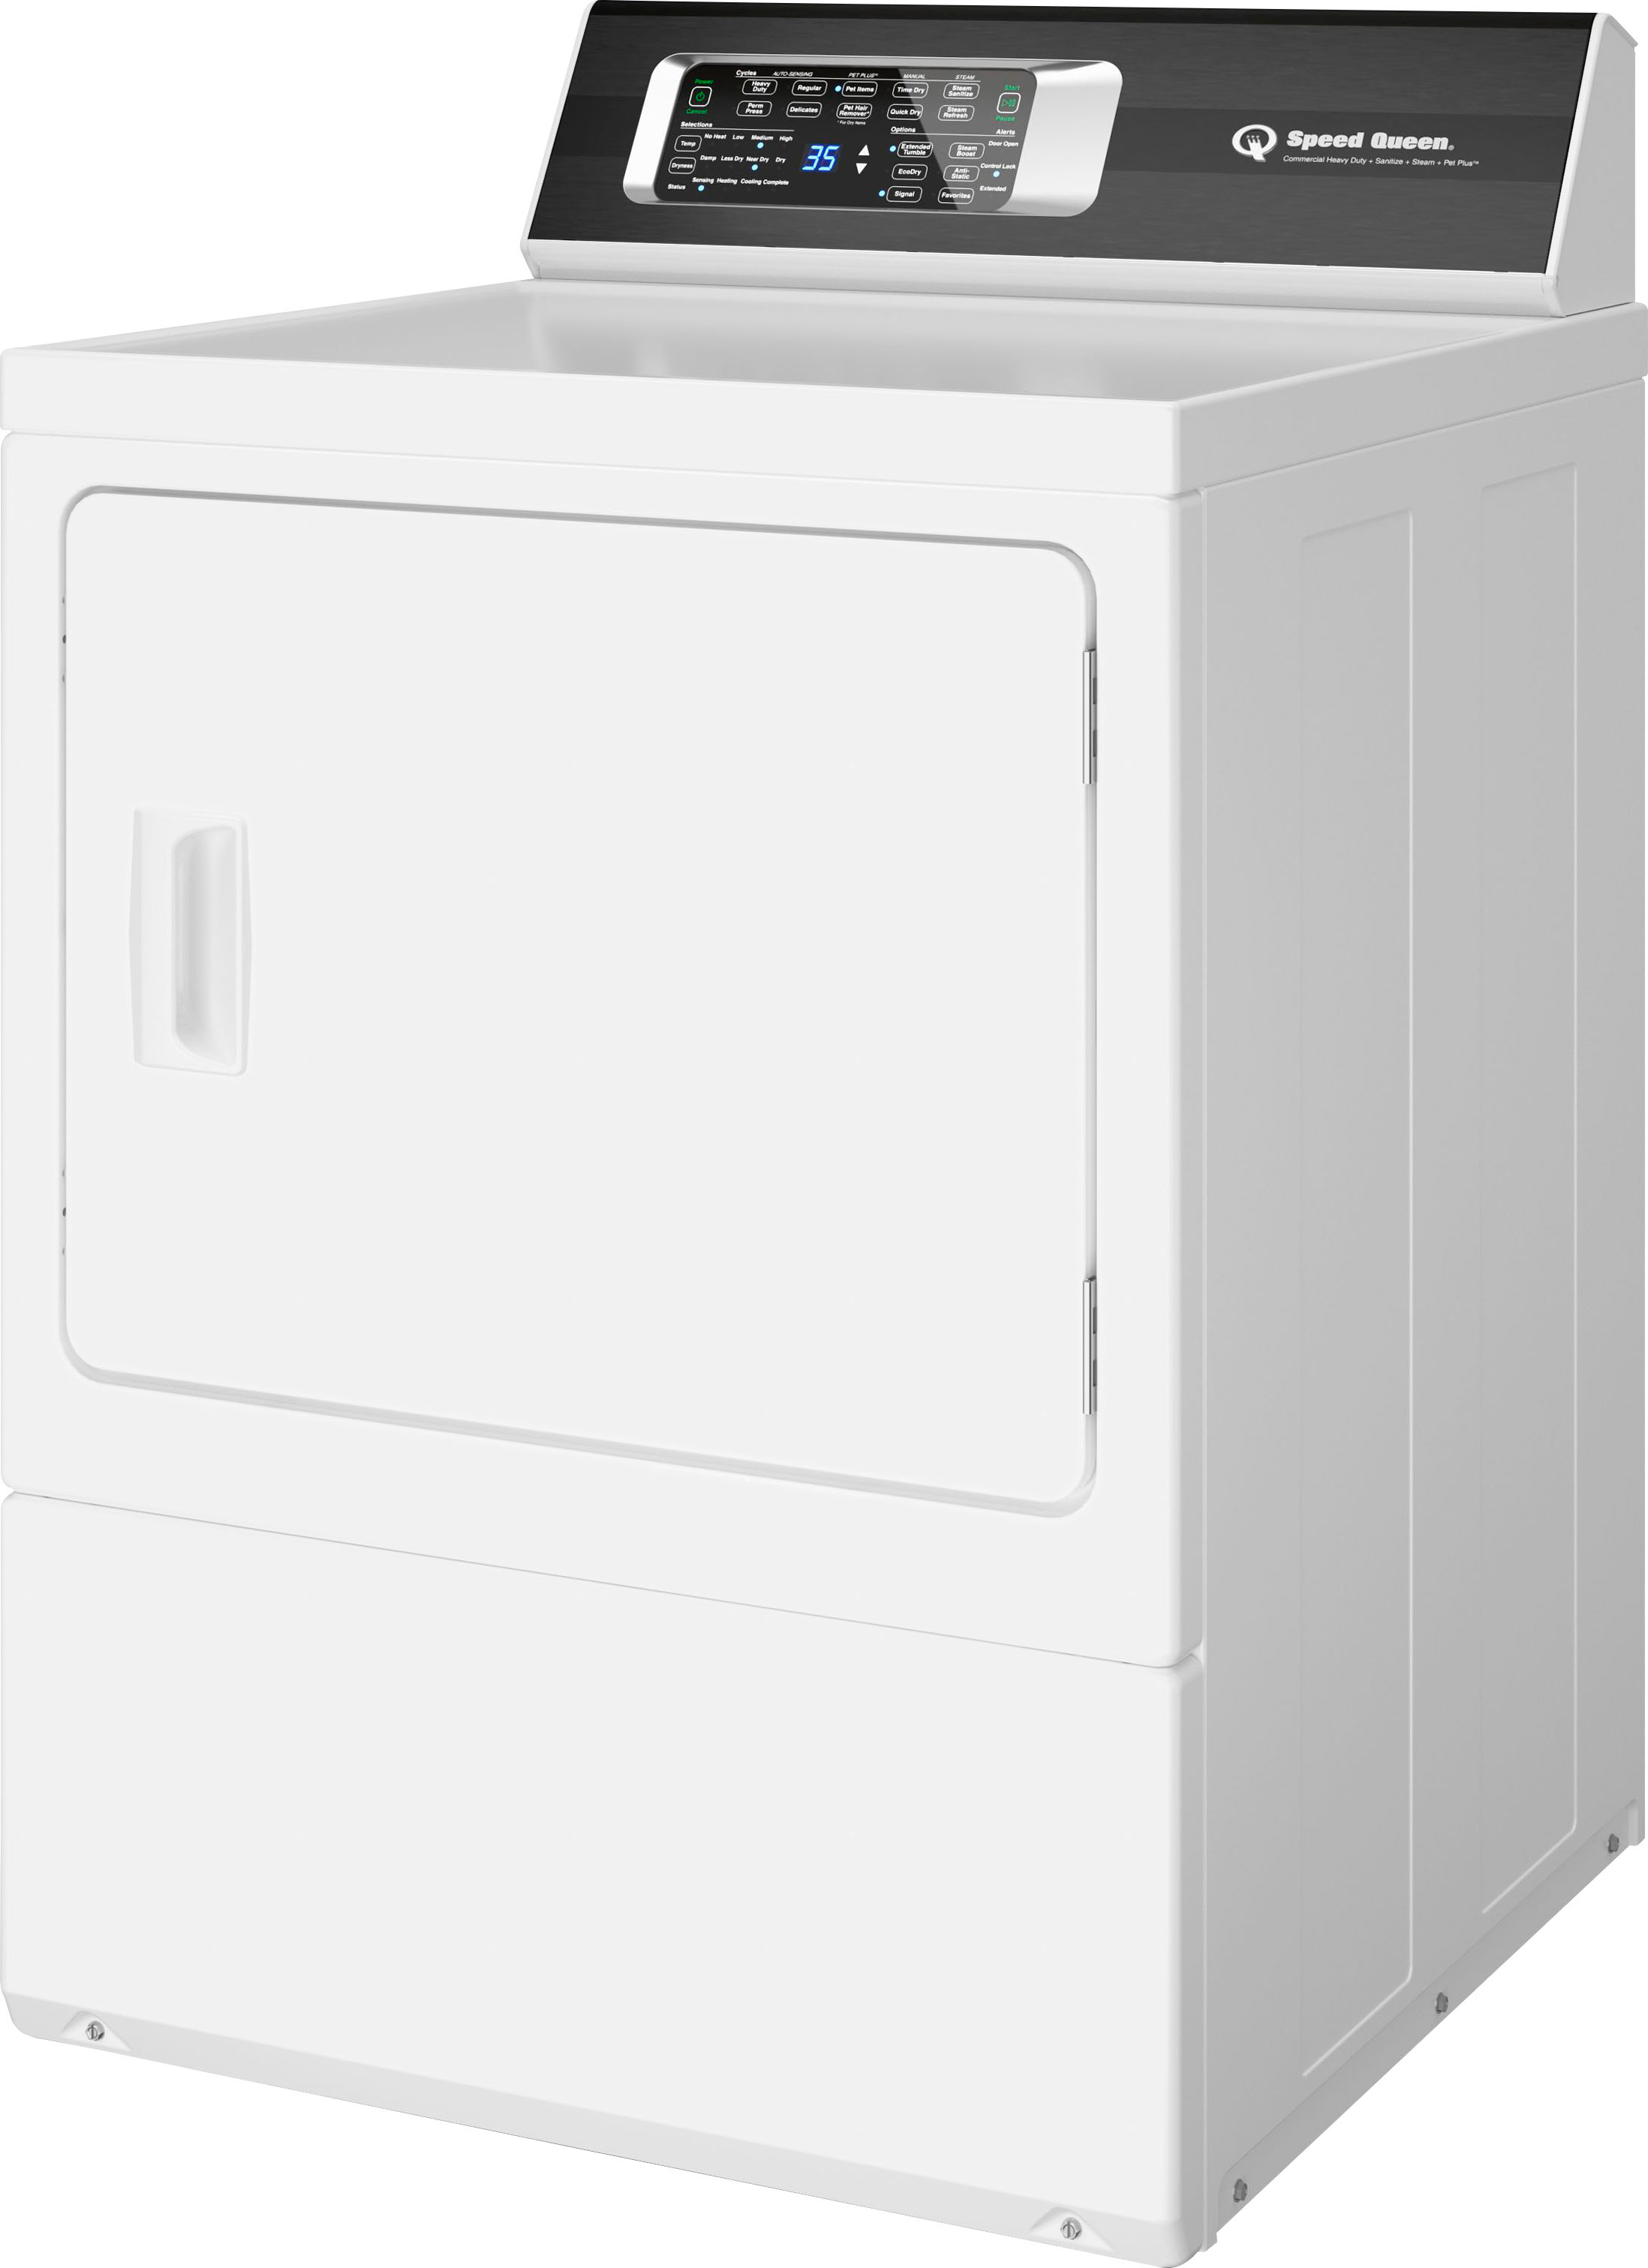 Angle View: Speed Queen - DR7 Pet Friendly Sanitizing Electric Dryer - White